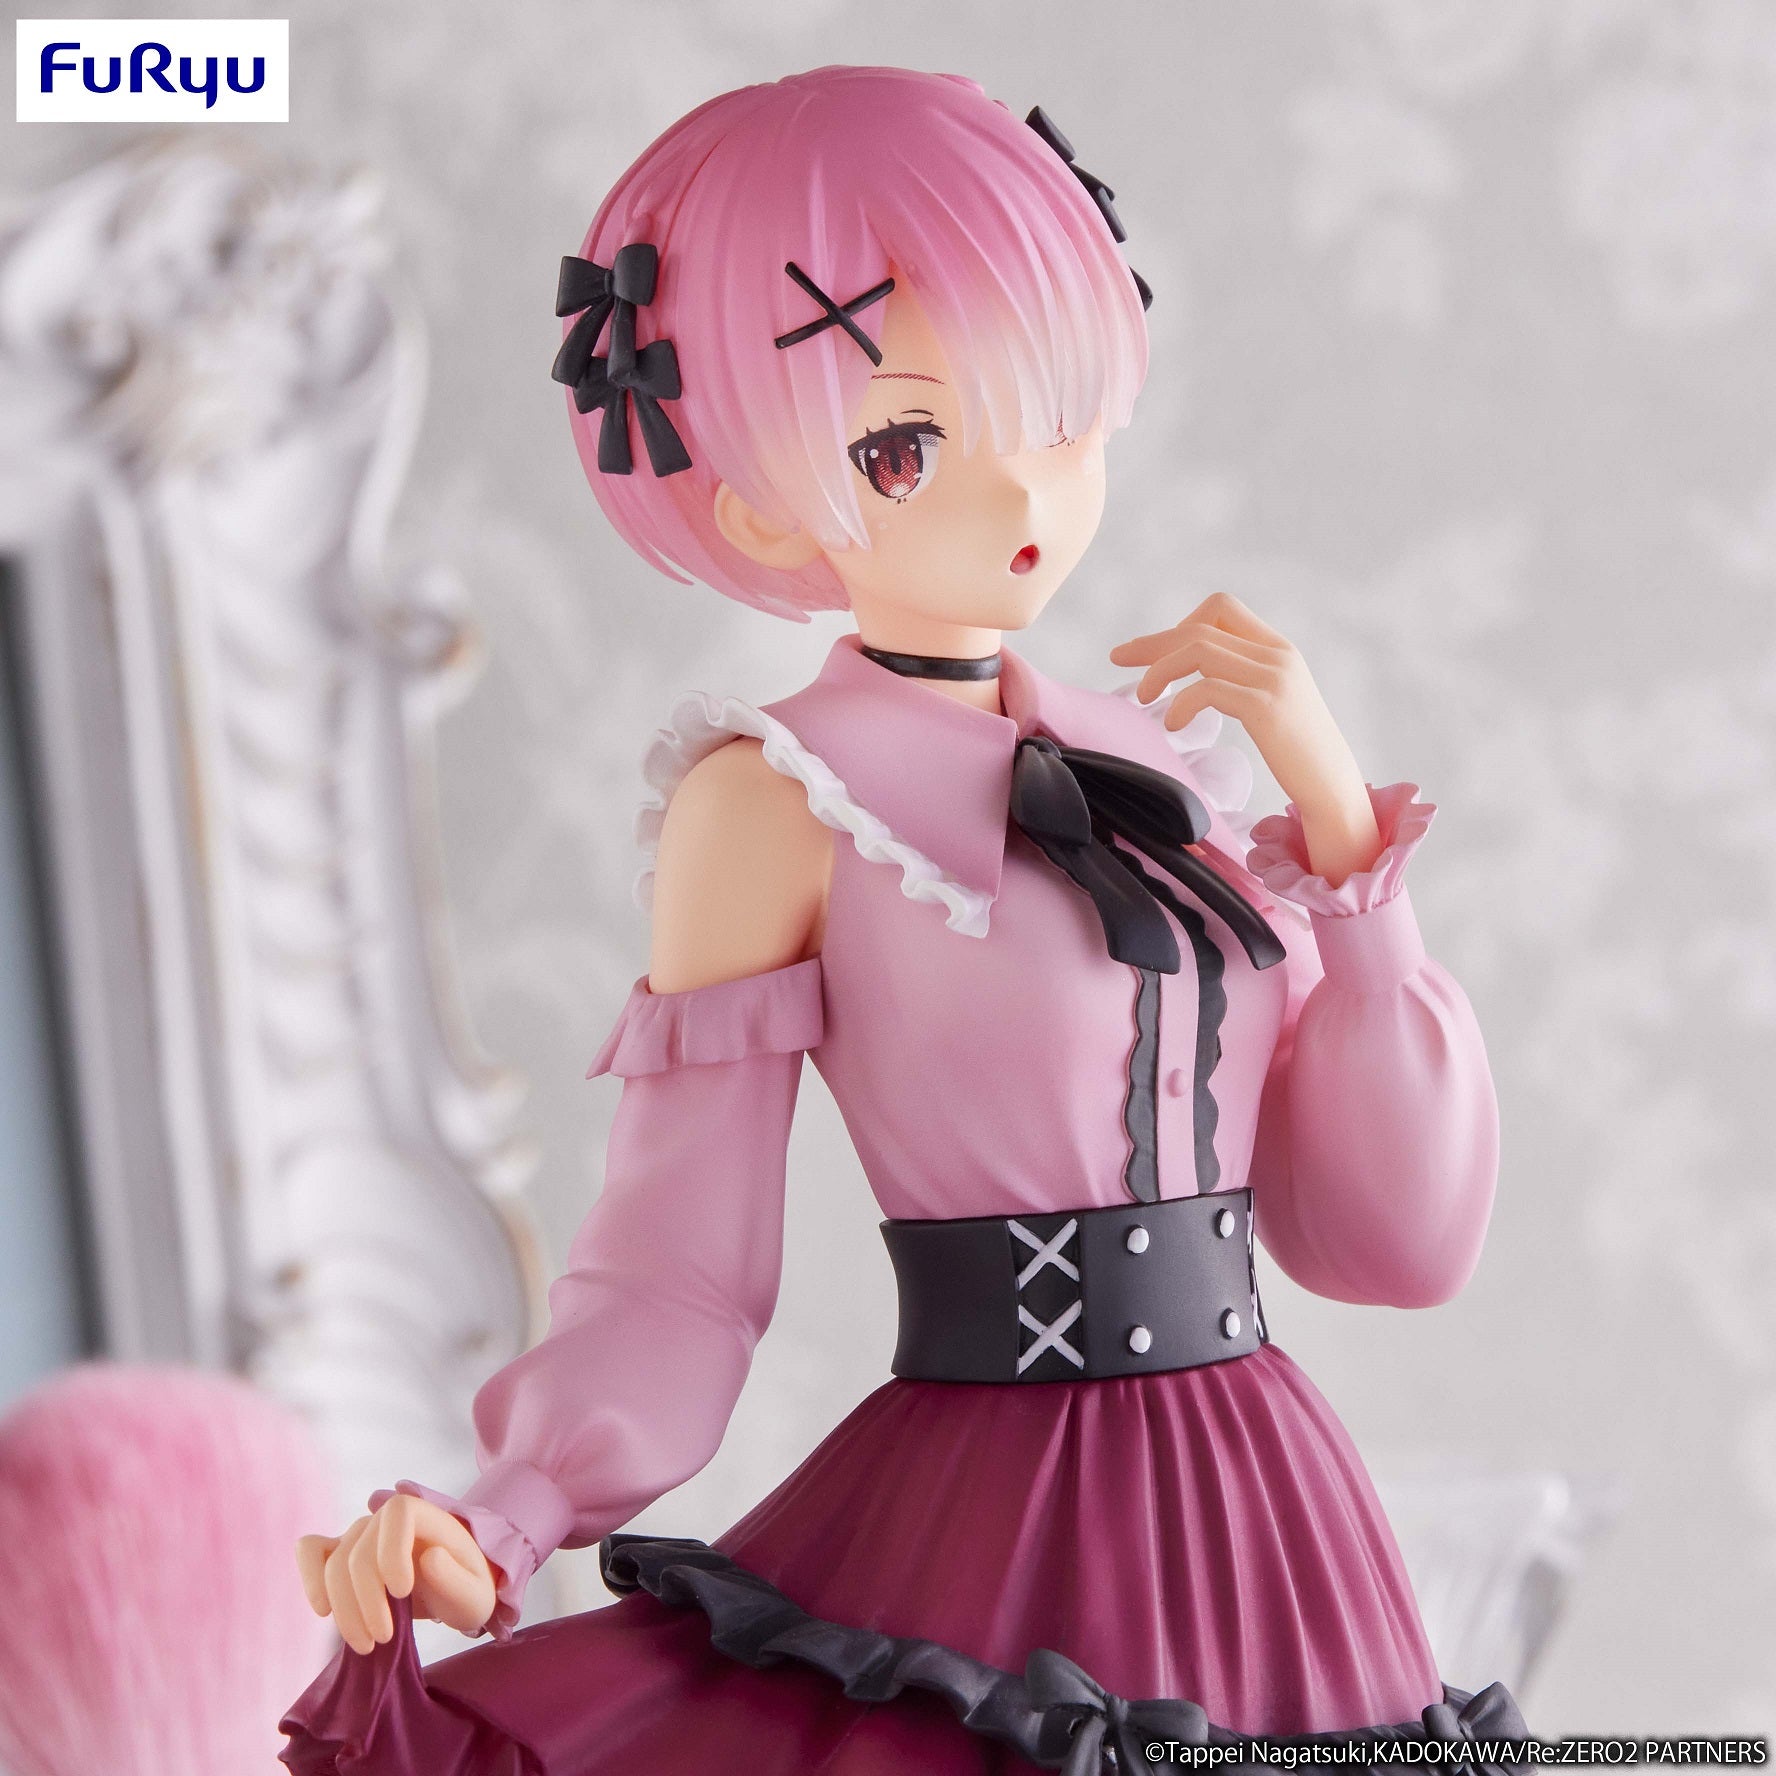 Furyu Figures Trio Try It: Re Zero Starting Life In Another World - Ram Girly Outfit